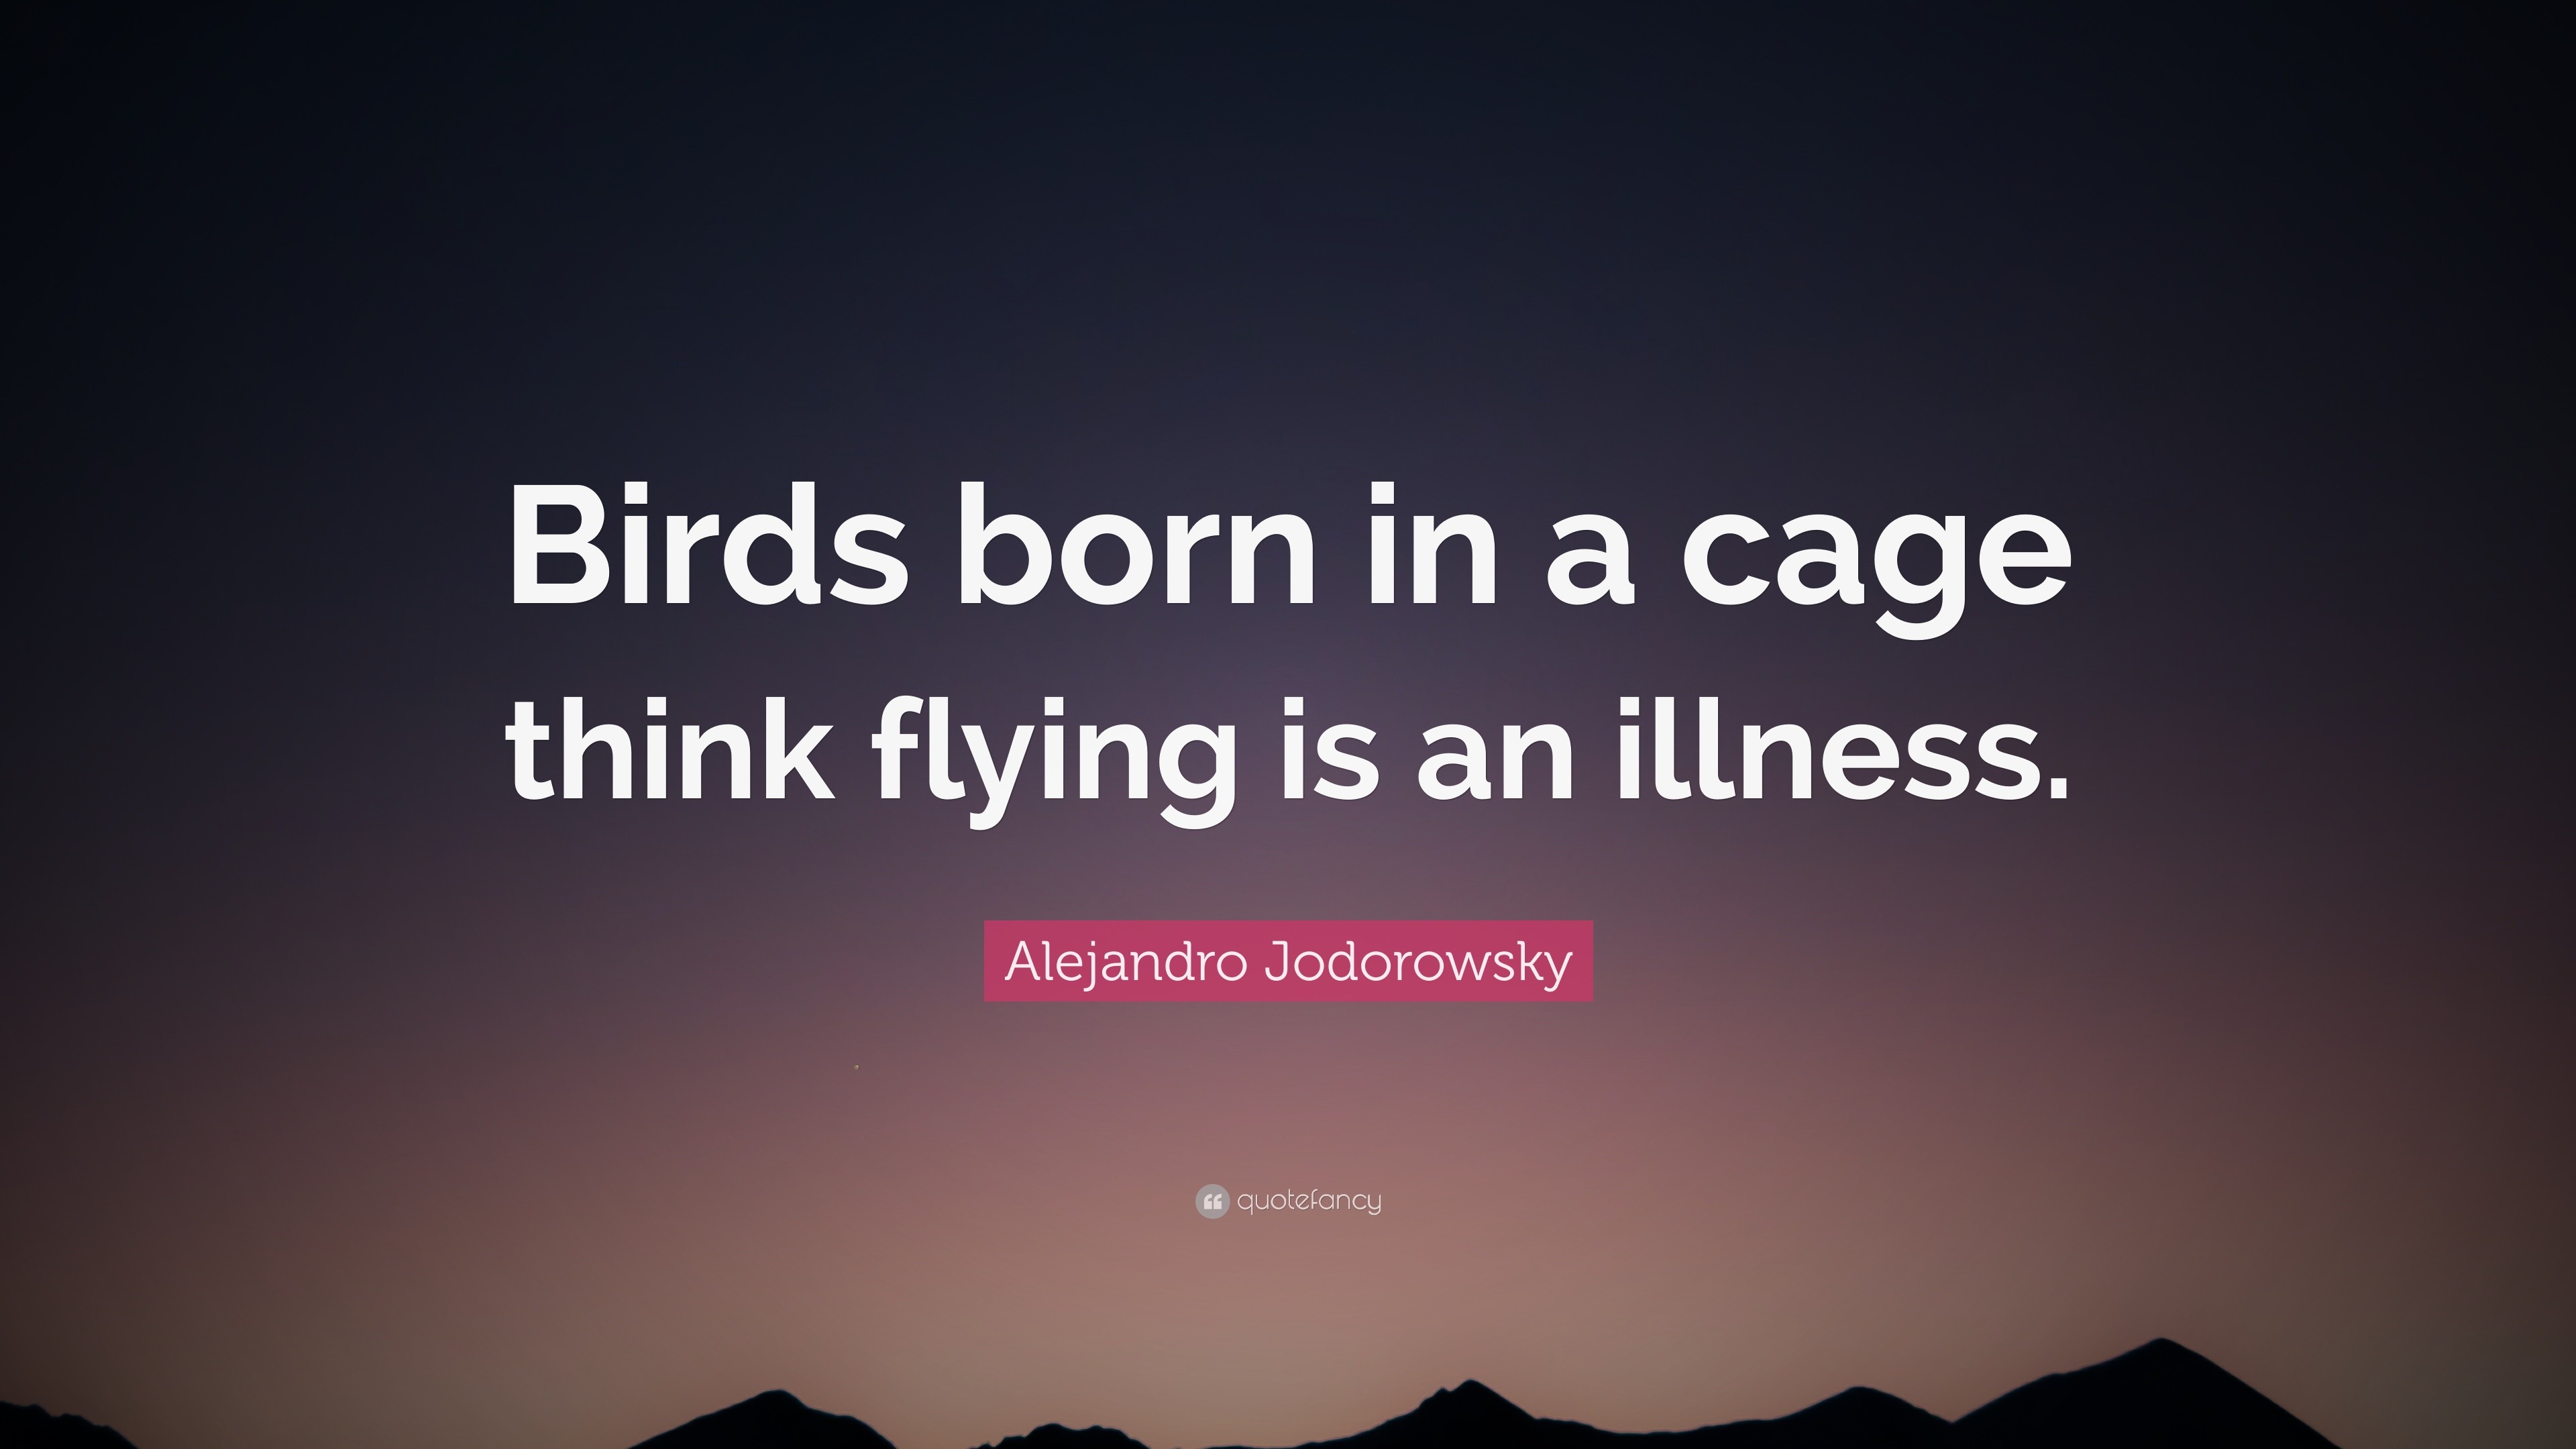 Alejandro Jodorowsky Quote: “Birds born in a cage think flying is an